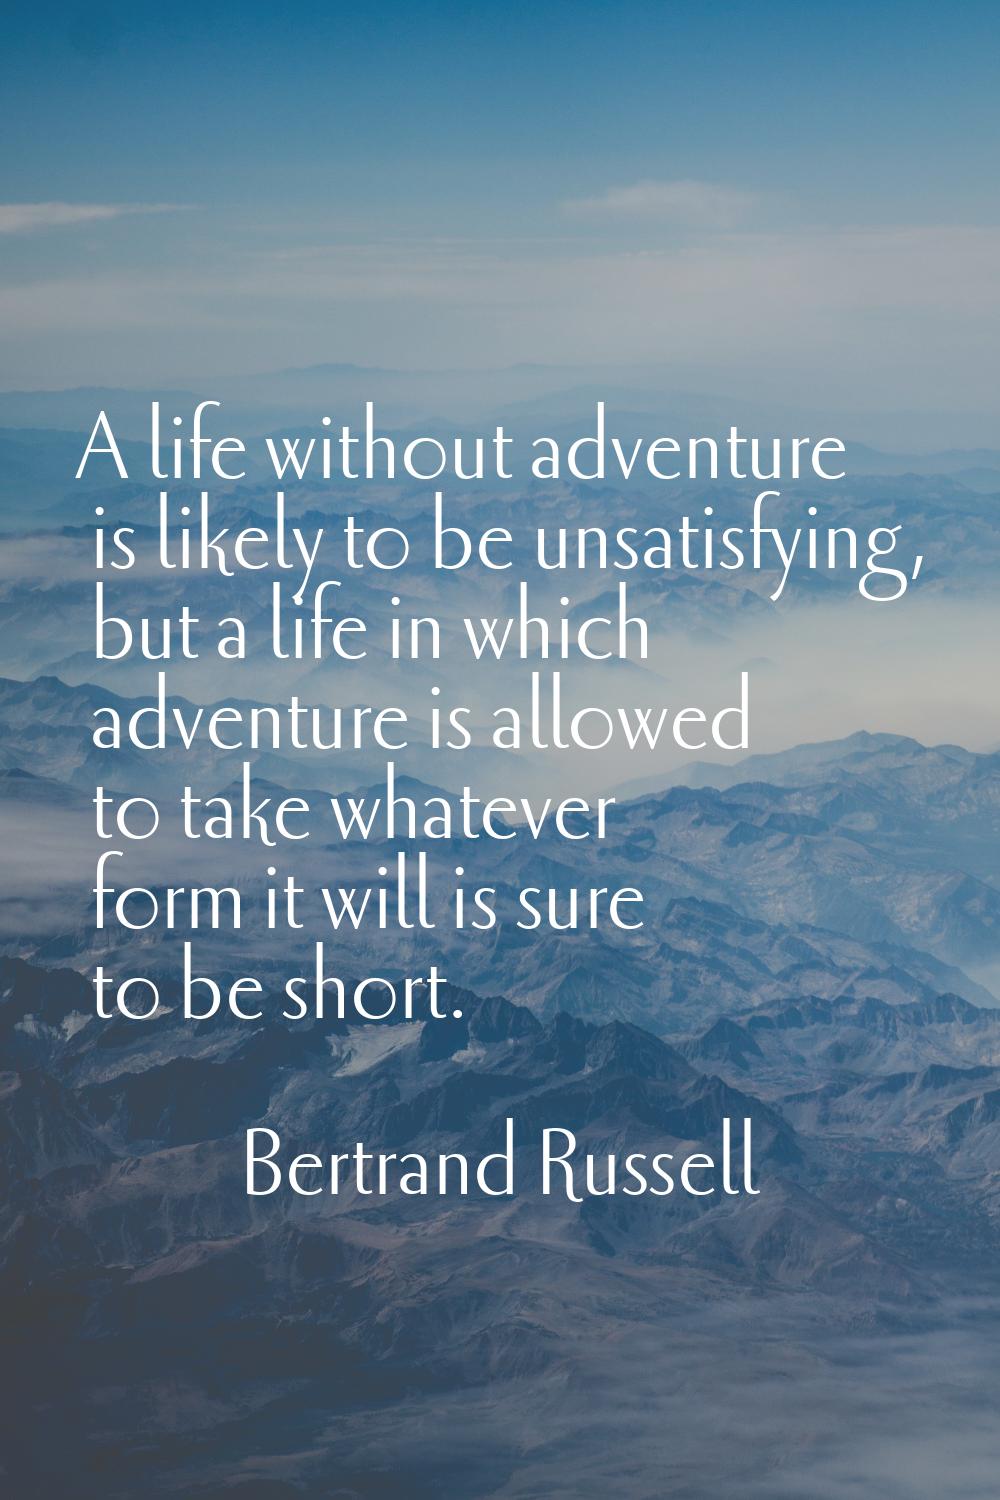 A life without adventure is likely to be unsatisfying, but a life in which adventure is allowed to 